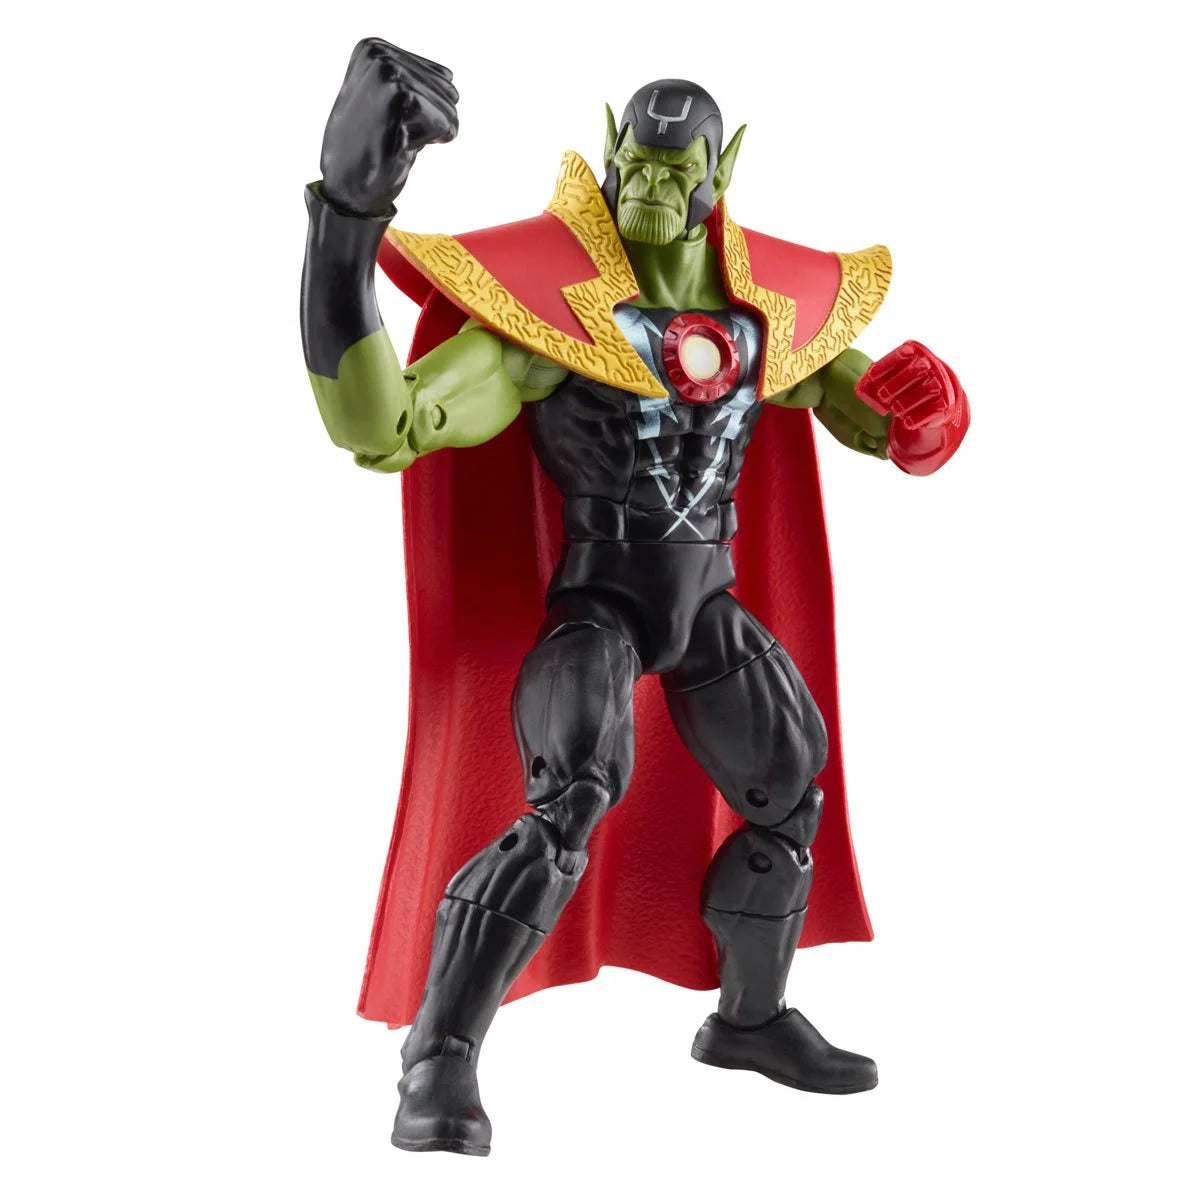 Avengers 60th Anniversary Marvel Legends Skrull Queen and Super-Skrull 6-Inch Action Figures - Heretoserveyou